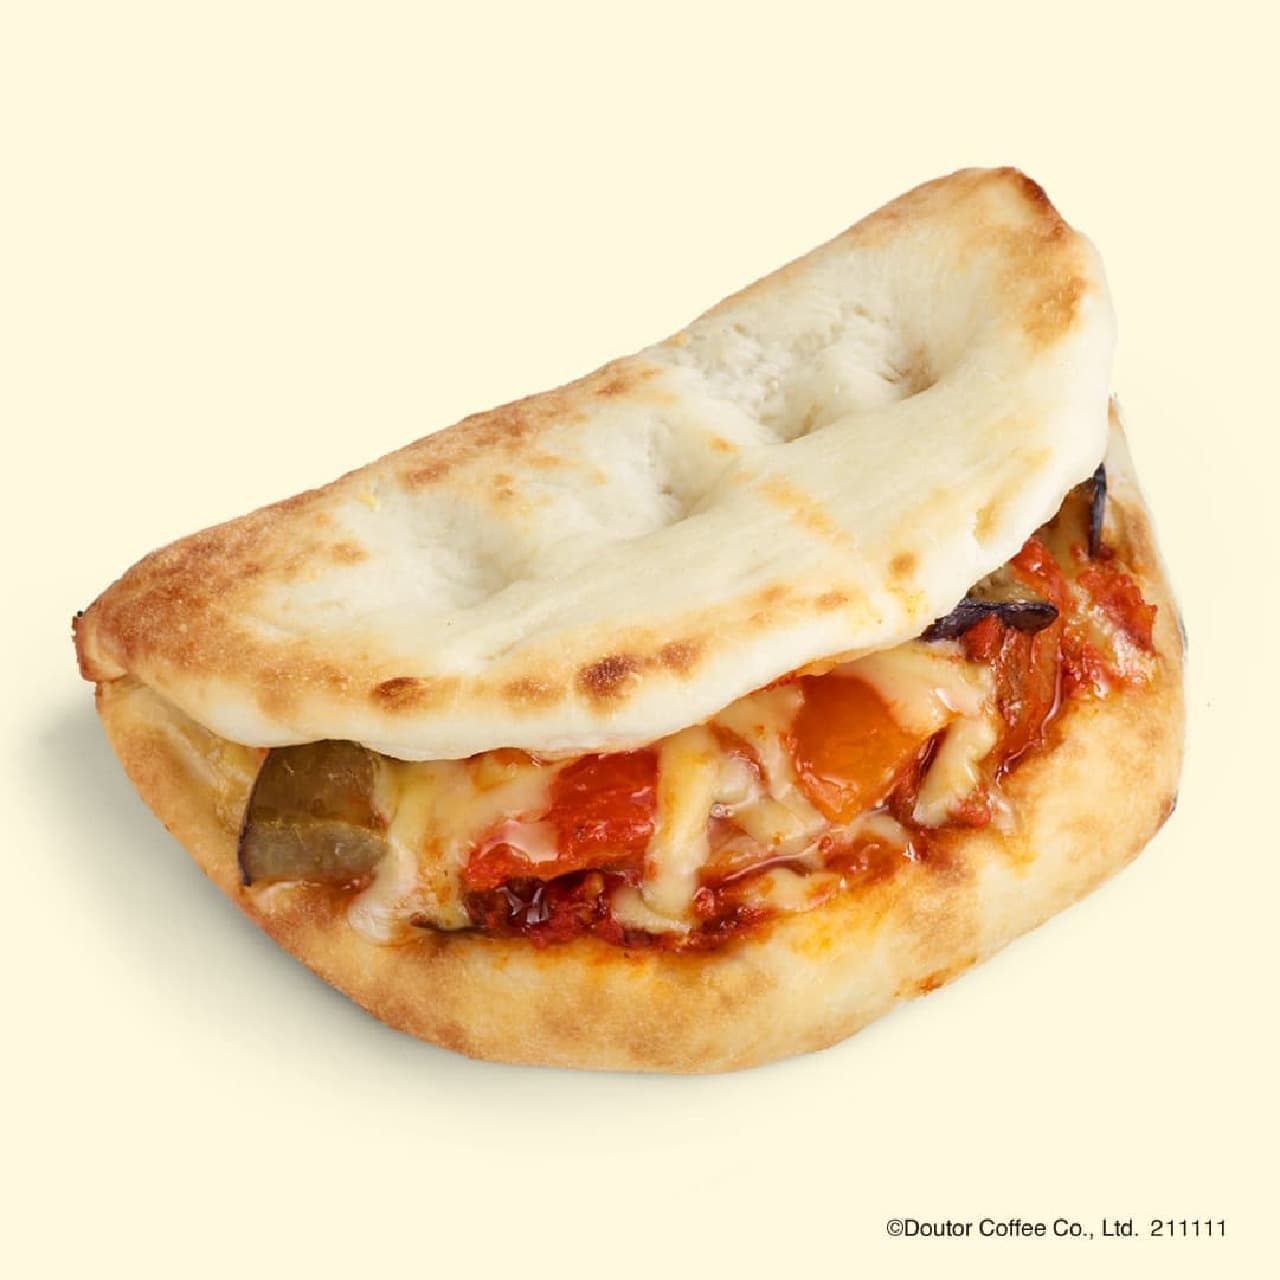 Doutor "Calzone cheese melting eggplant bolognese"